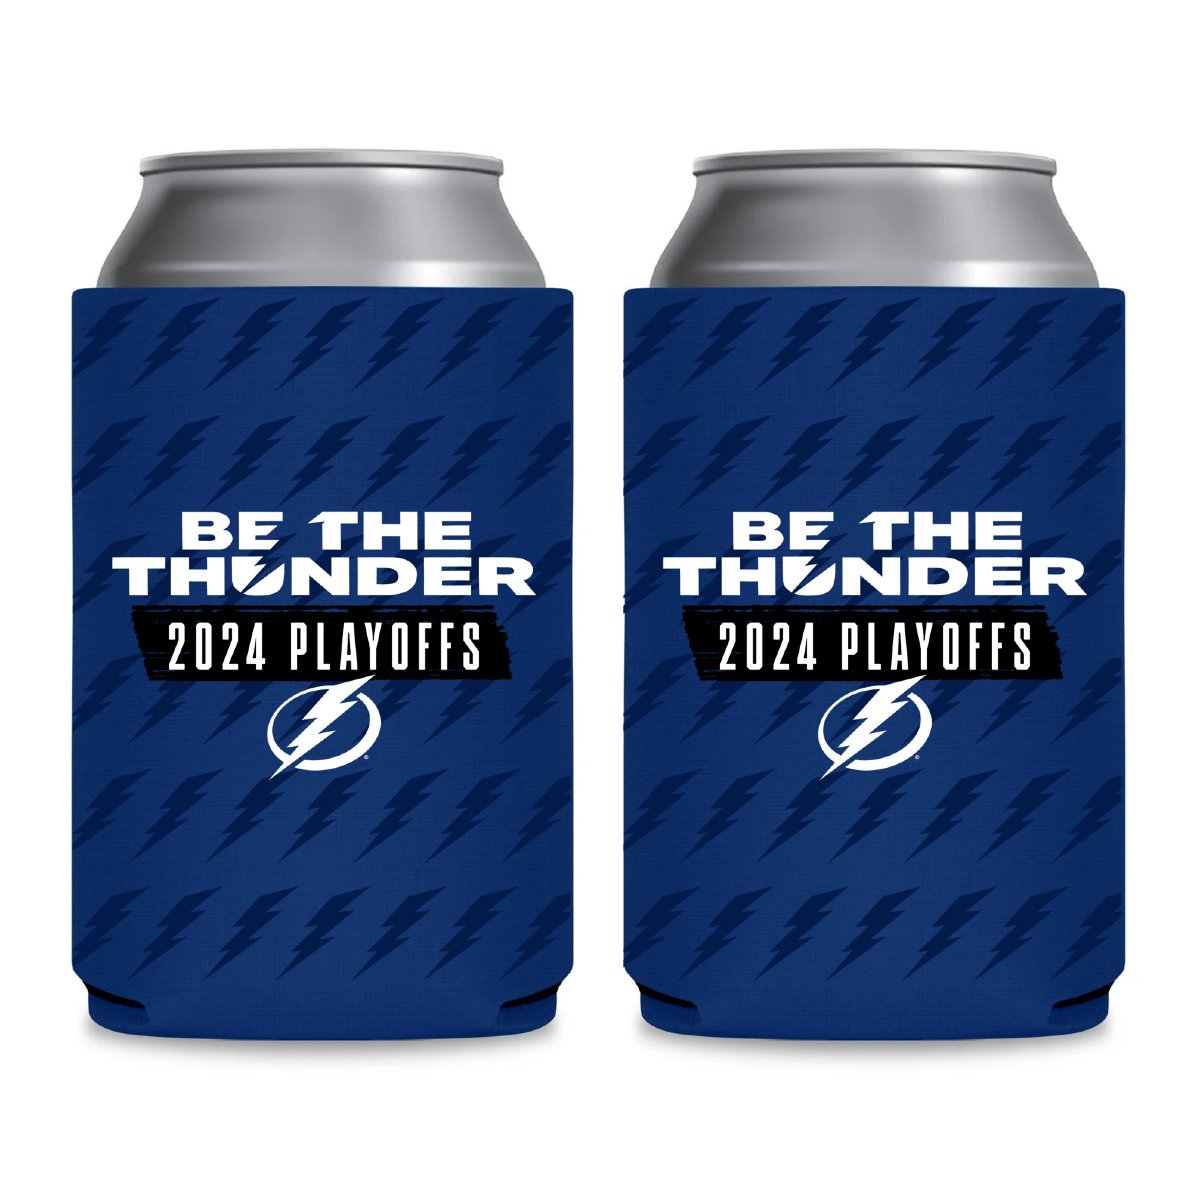 Tampa Bay Lightning 2024 Playoffs Be the Thunder 12oz Can Cooler